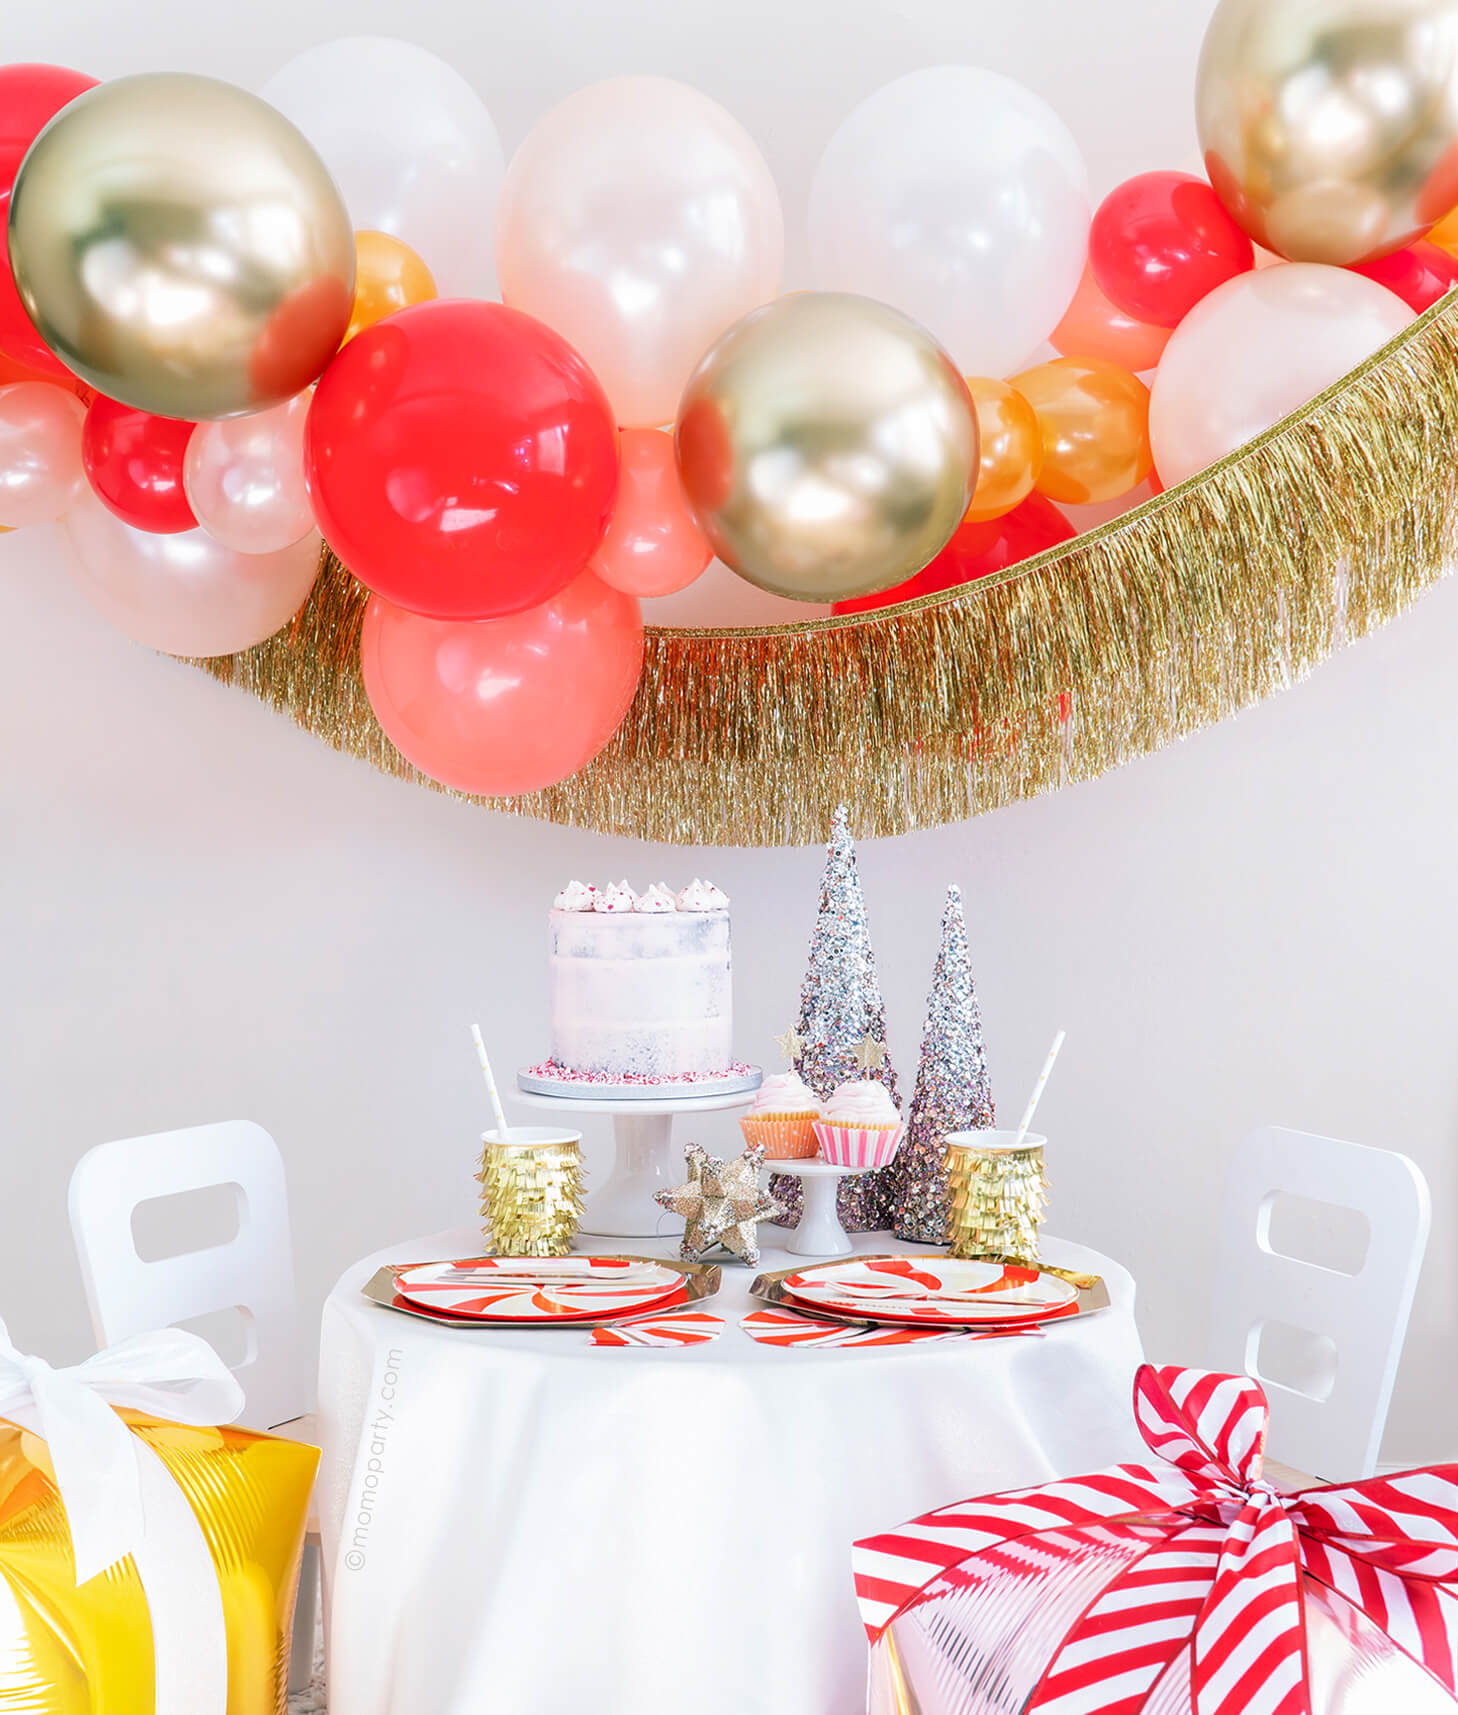 Momo Party Holiday party box - Christmas Candy Cane Glam Holiday Box, Featuring Meri Meri Gold Large Dinner Plates, Peppermint Swirl Side Plates, Gold Fringe Party Cups, Candy Cane Napkins, Silver Wooden Cutlery Set, Gold Star Party Straws, Gold Tinsel Fringe Garland, Candy-cane-glam themed Gold, Red, Pearl White, Coral, Pearl peach latex balloon garland. decorated with your cake, cupcakes, sparking trees for a modern classic cute christmas holiday celebration